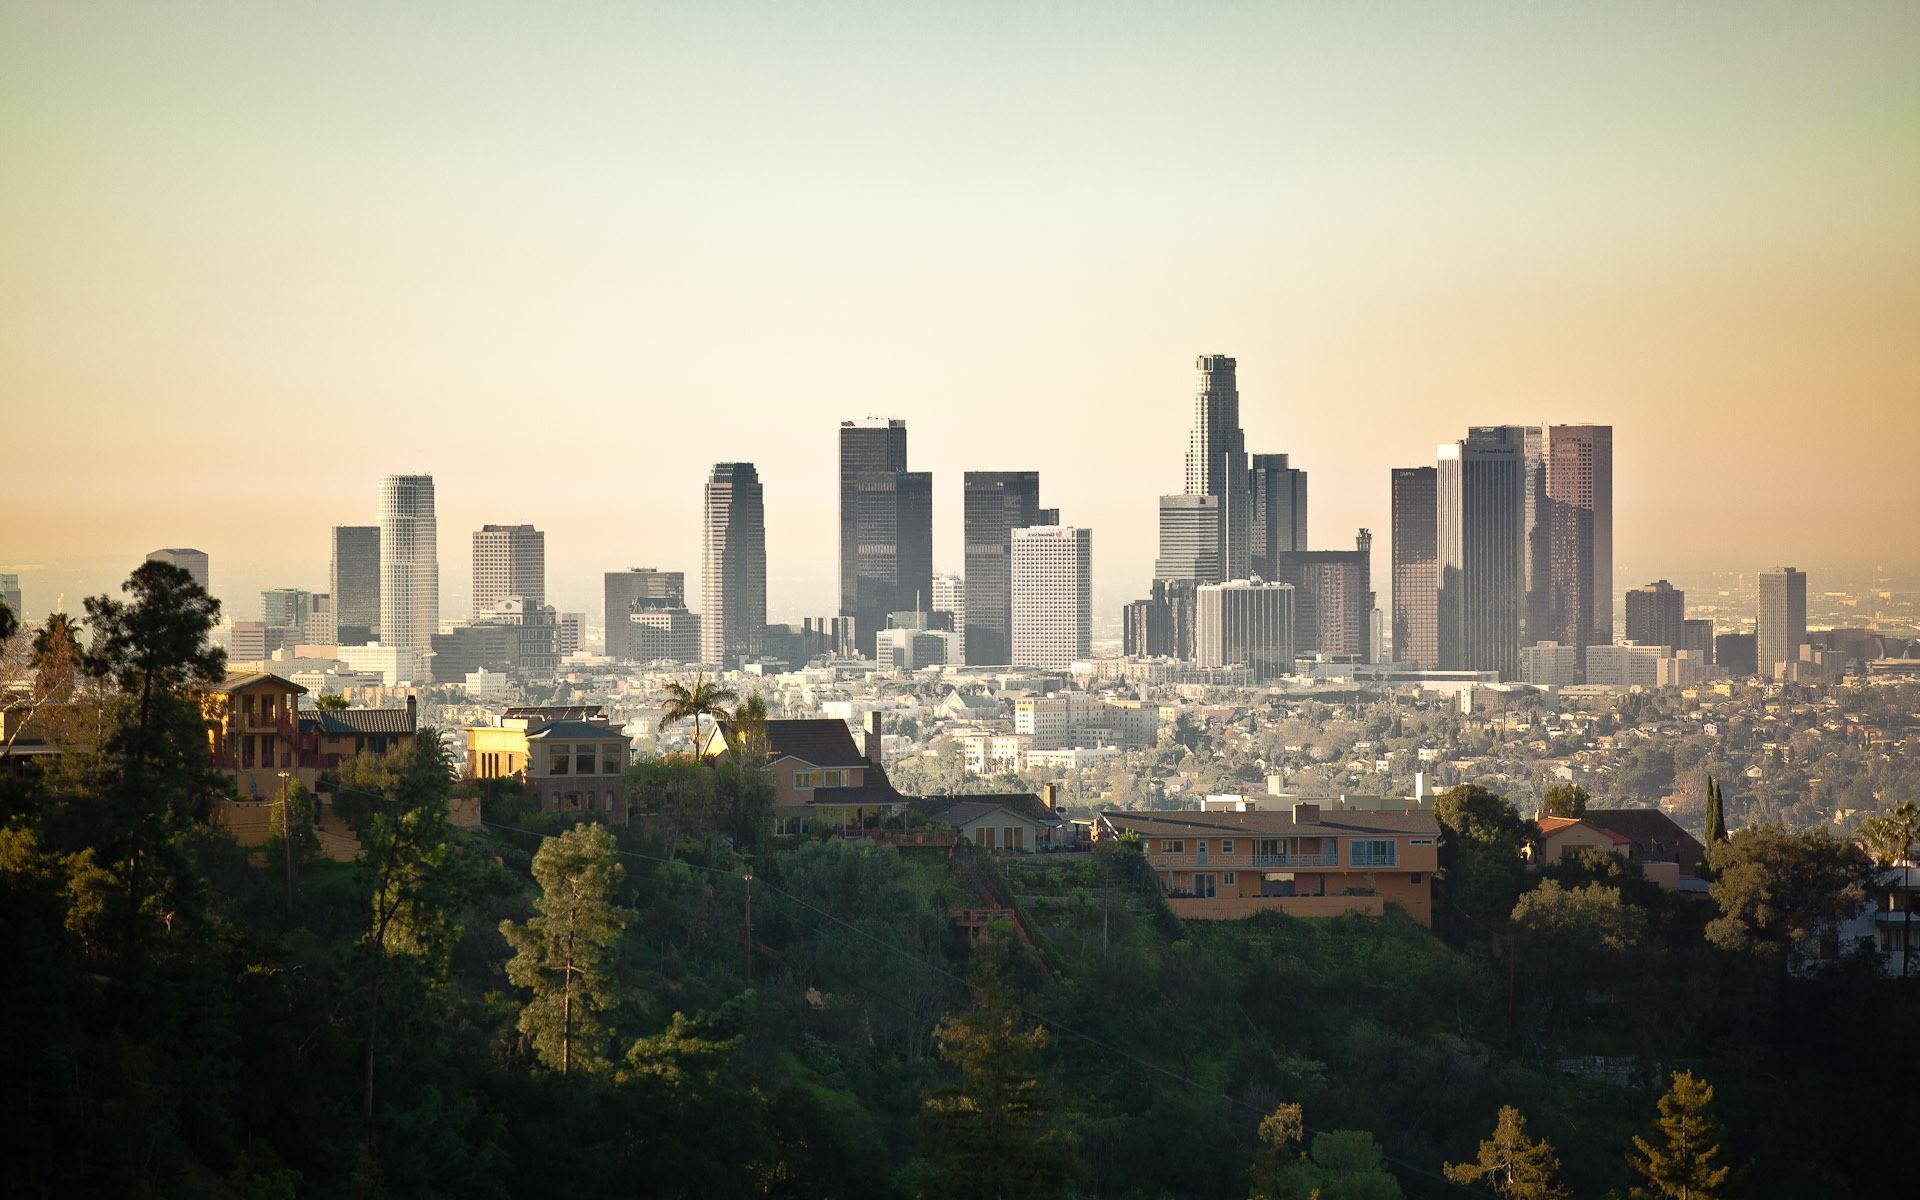 LA Wallpaper: Los Angeles Wallpaper Available For Download In HD